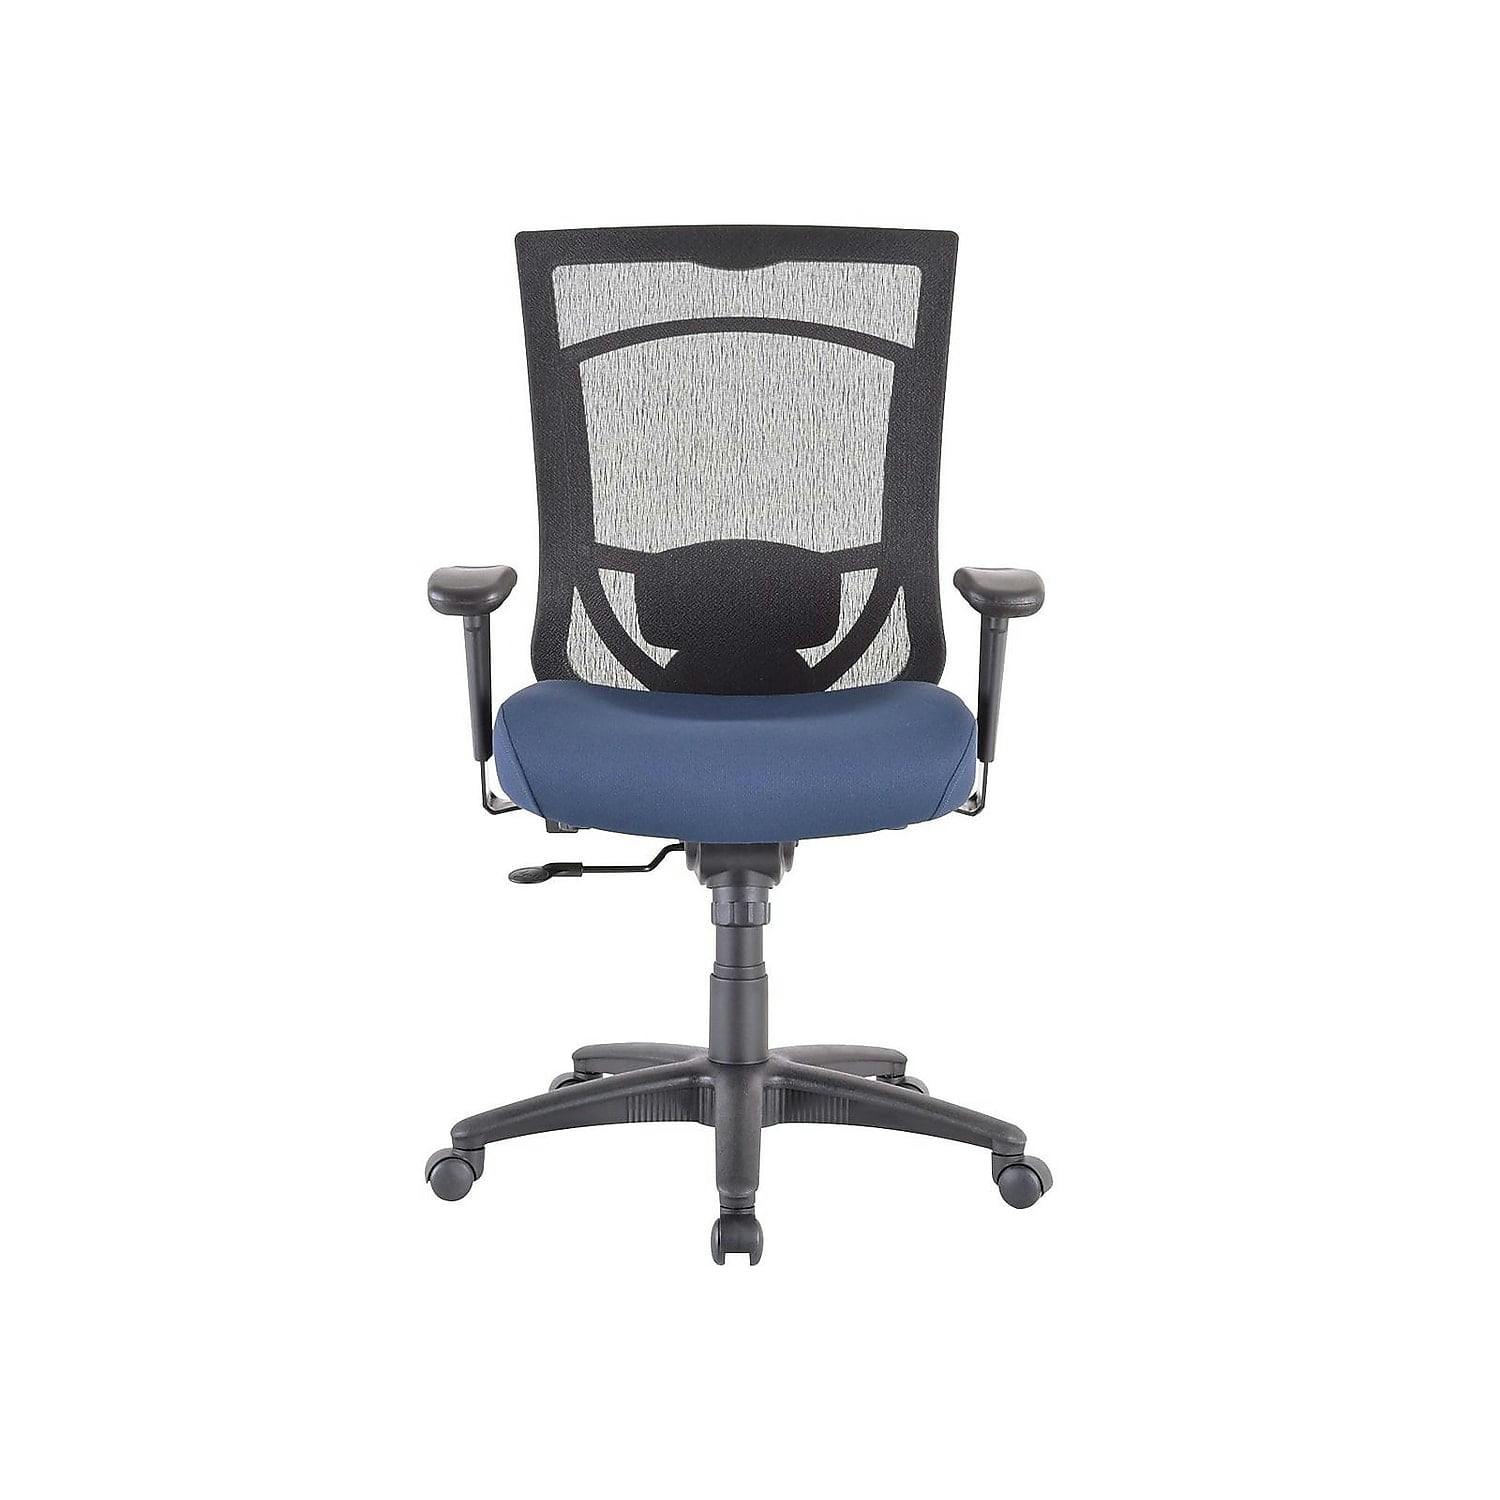 Adjustable High-Back Swivel Task Chair in Black Mesh and Cobalt Fabric